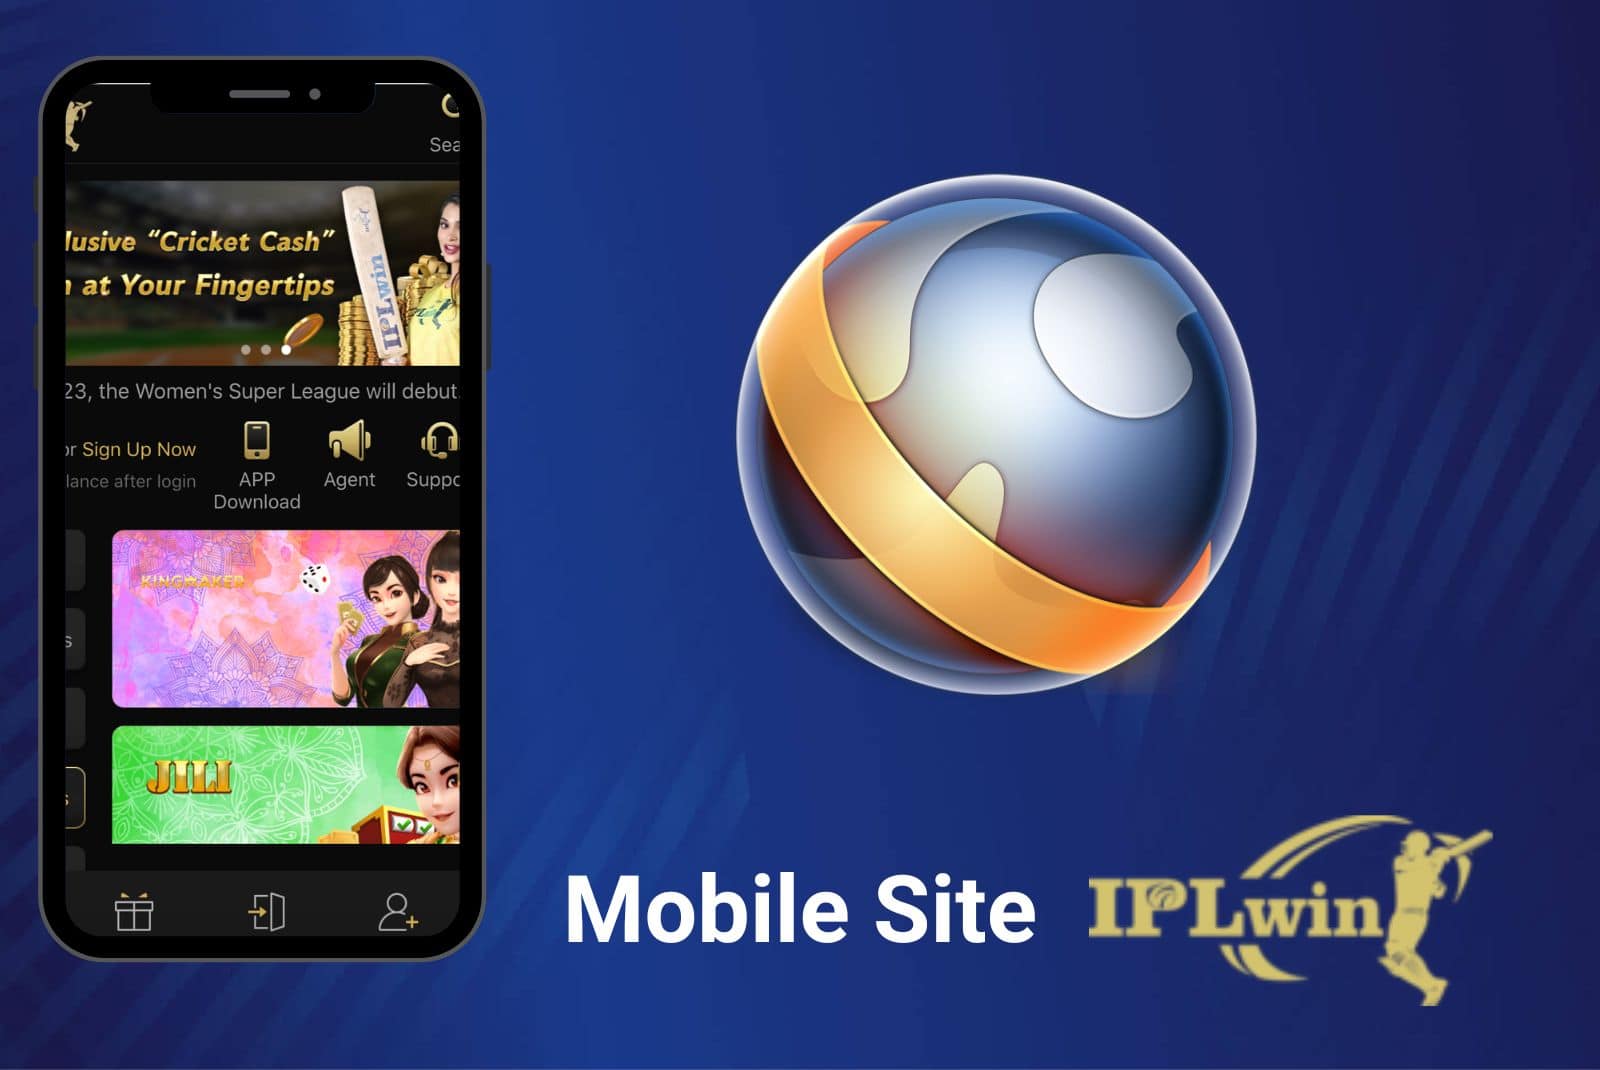 IPLwin India mobile site detailed review